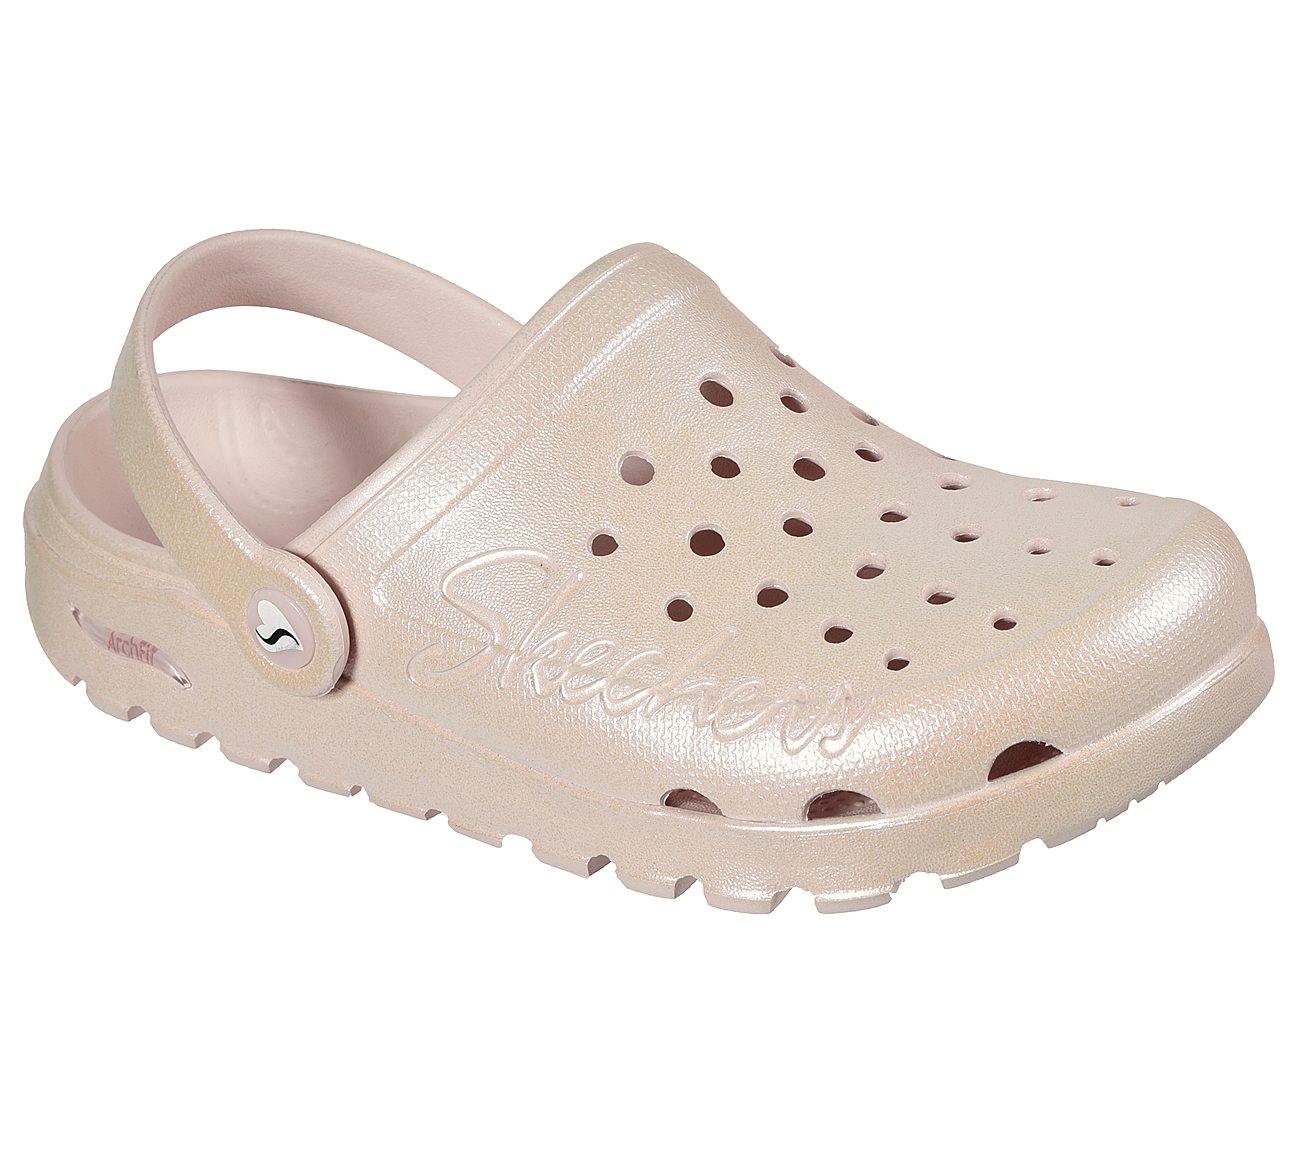 ARCH FIT FOOTSTEPS-PIXIE DUST, LLLIGHT PINK Footwear Lateral View